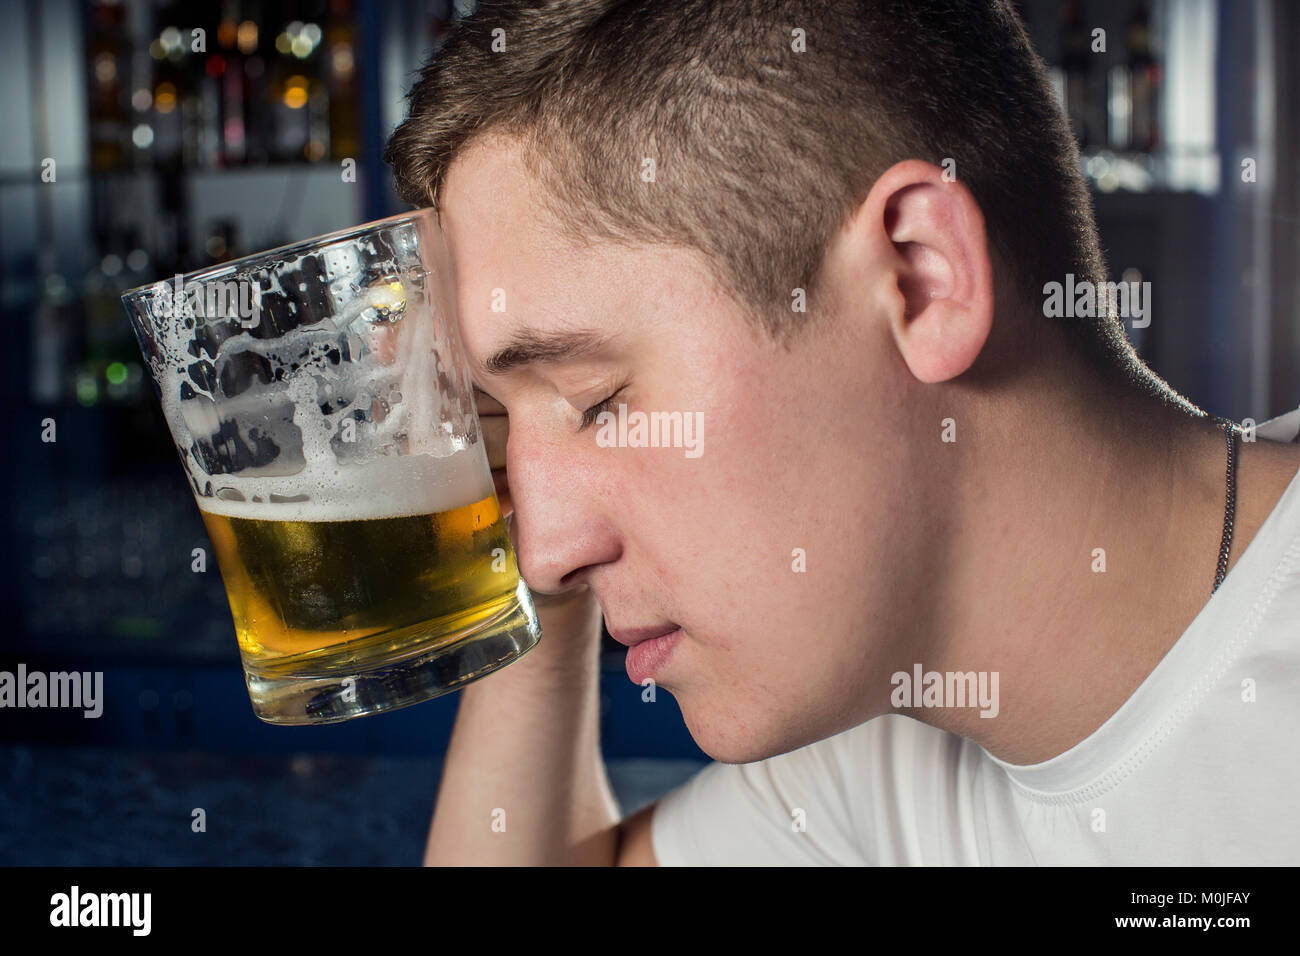 Alcohol, problems. Young alcoholic with beer Stock Photo